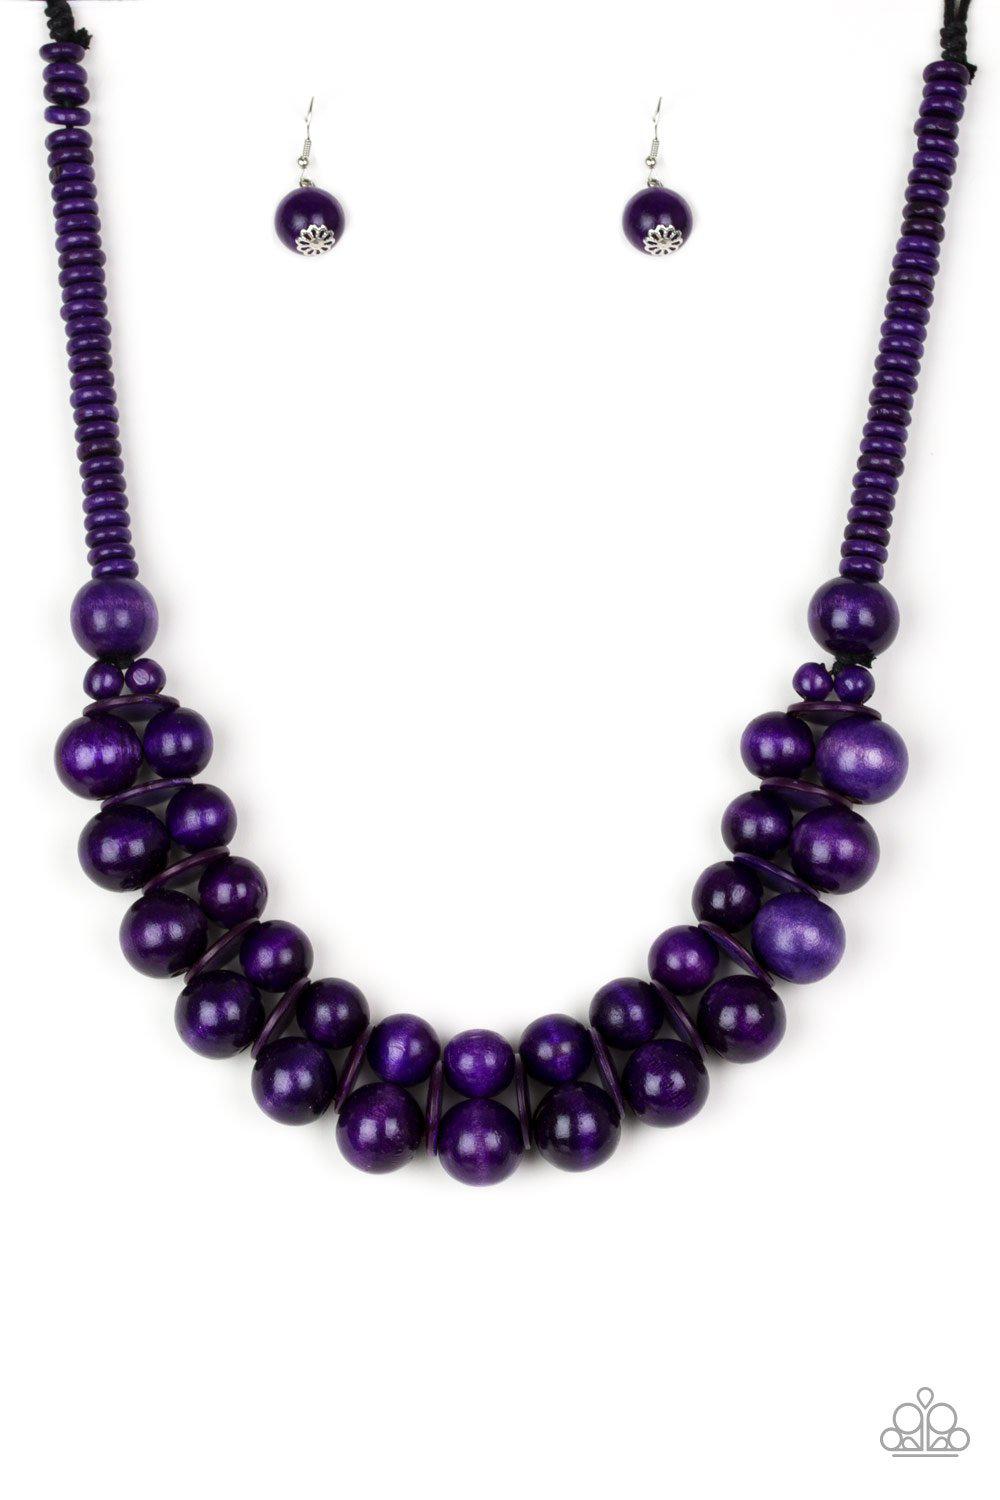 Caribbean Cover Girl Purple Wood Necklace - Paparazzi Accessories-CarasShop.com - $5 Jewelry by Cara Jewels